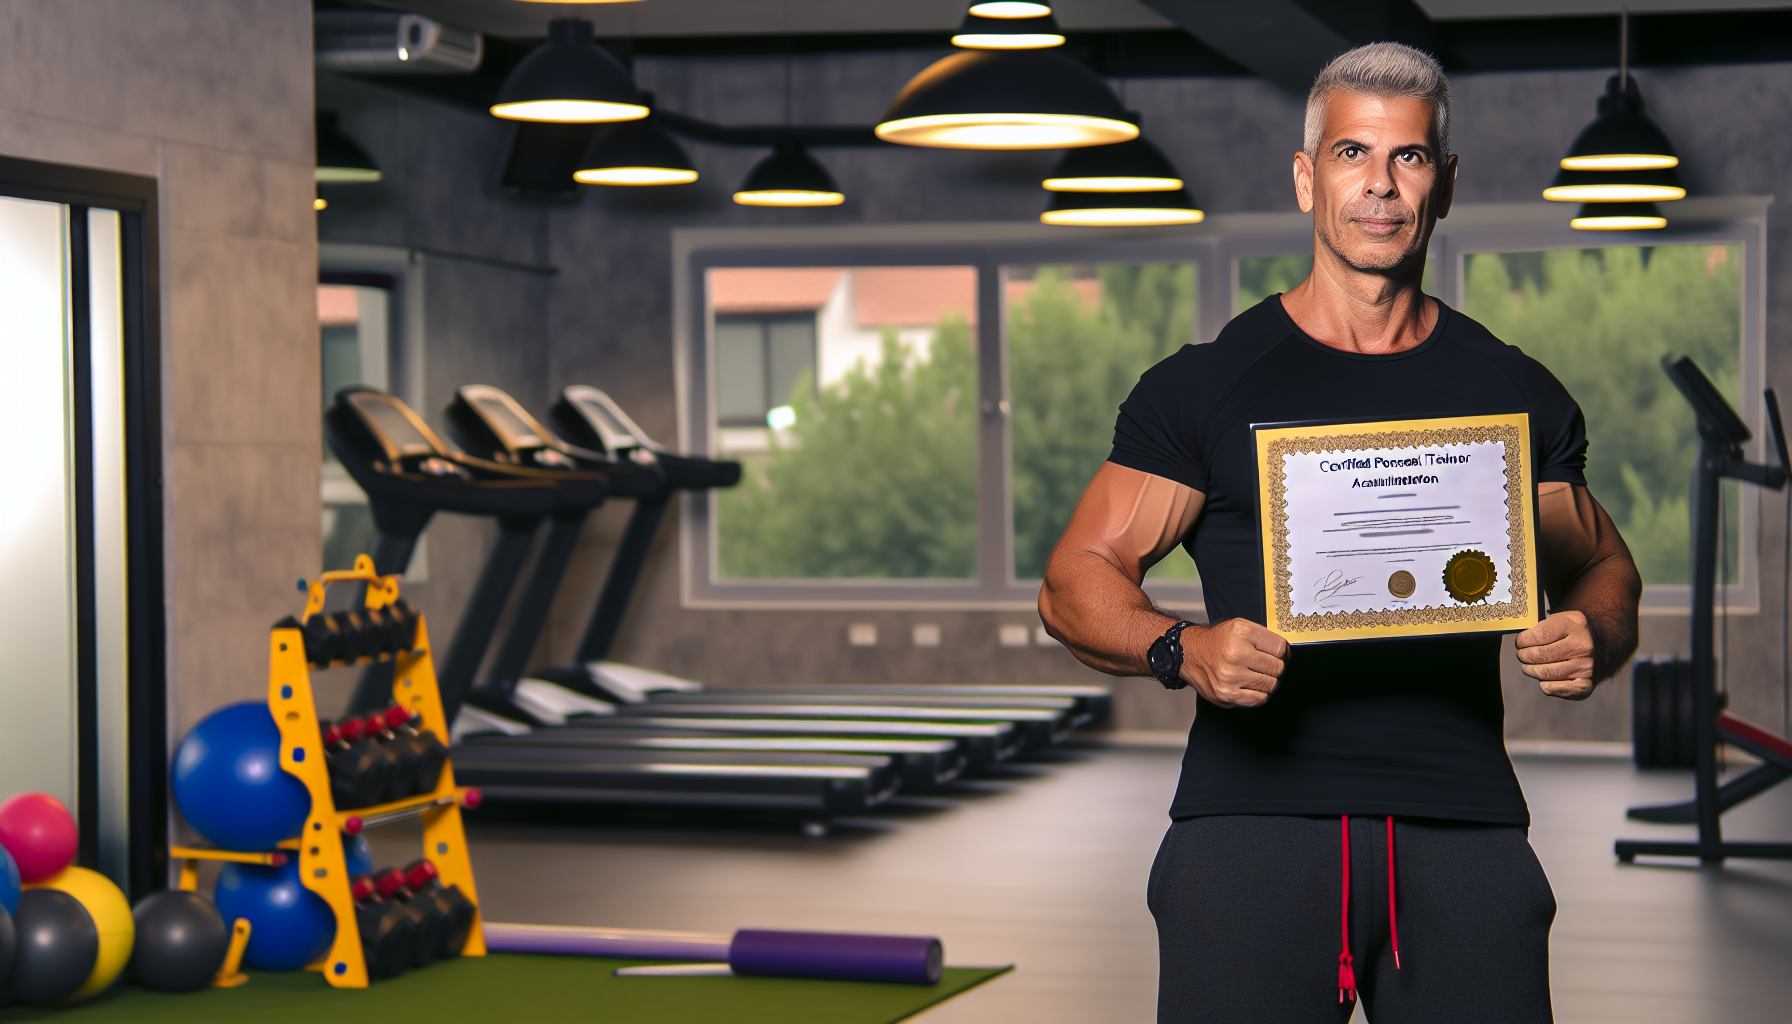 Certified personal trainer with accreditation certificate